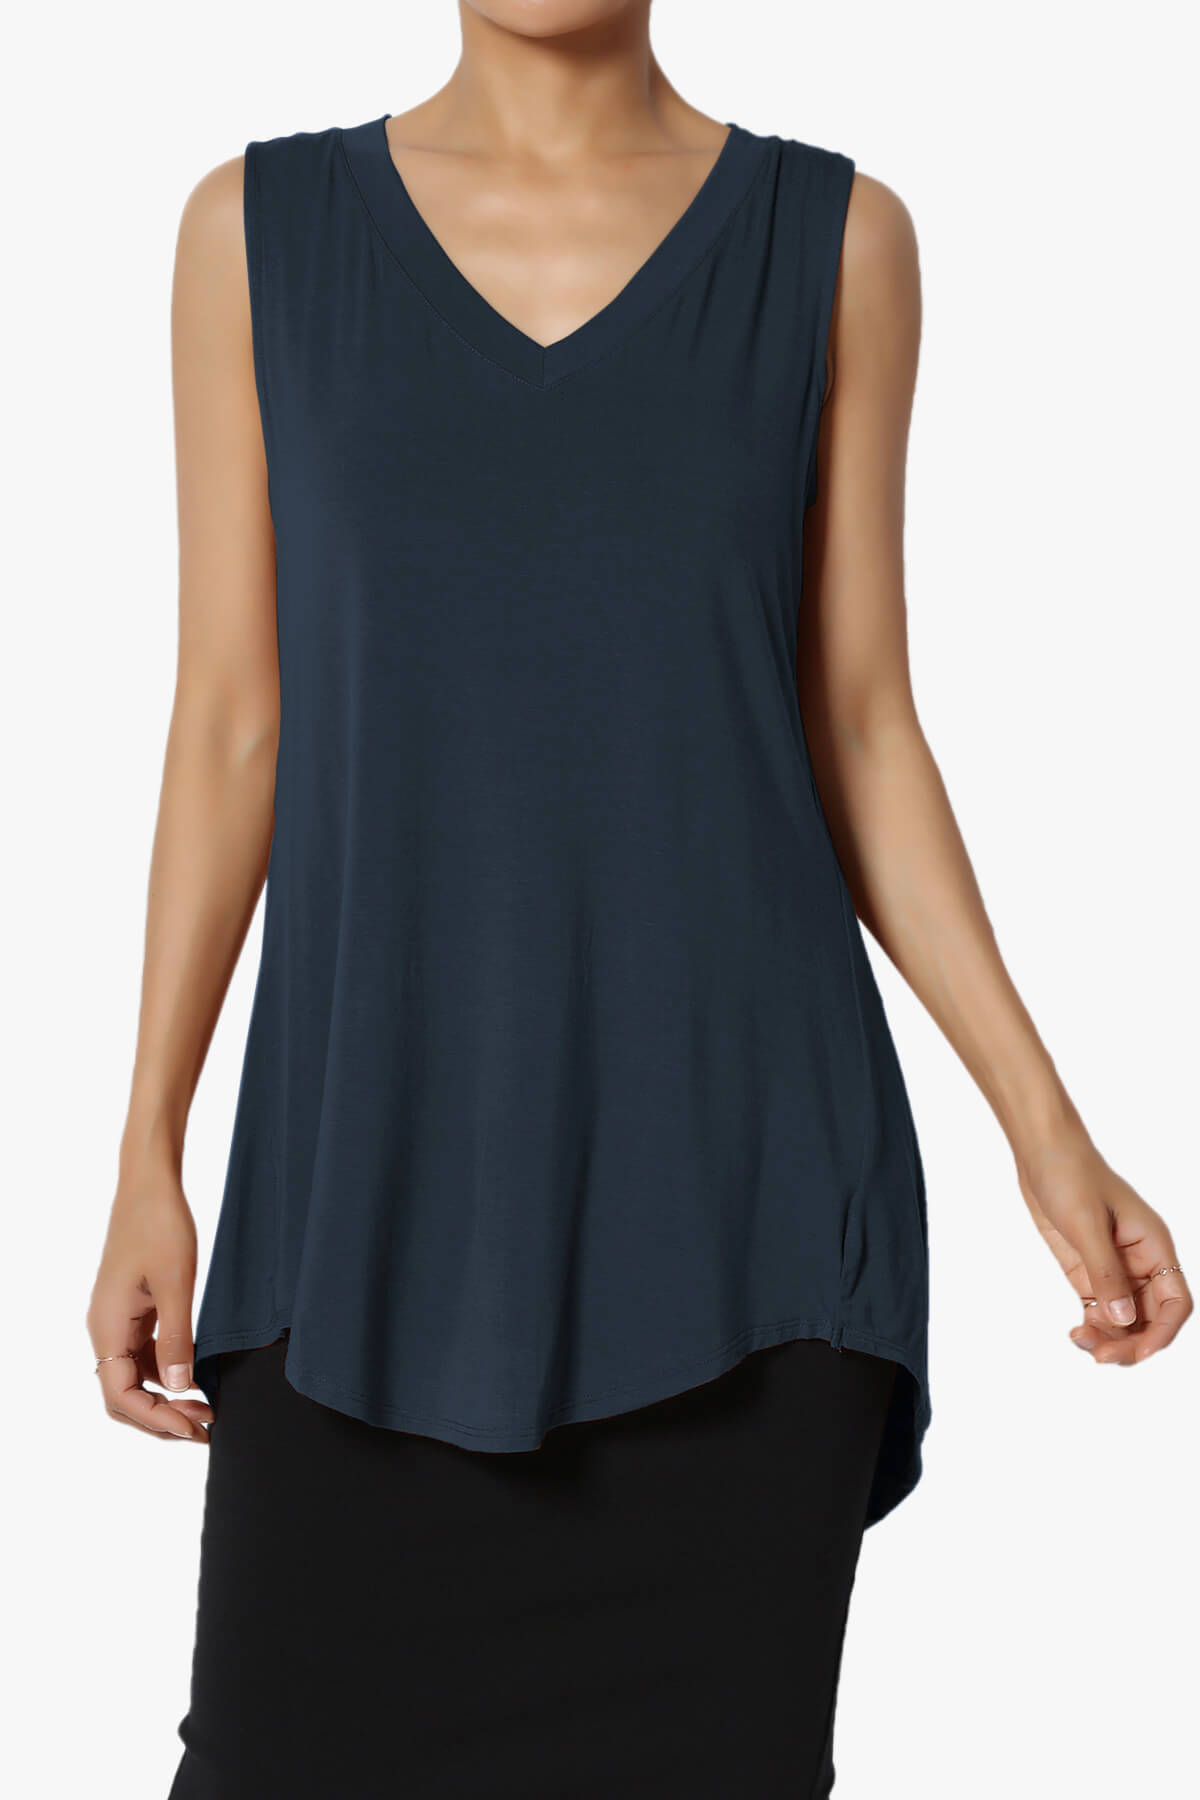 Load image into Gallery viewer, Myles Sleeveless V-Neck Luxe Jersey Top DARK NAVY_1
